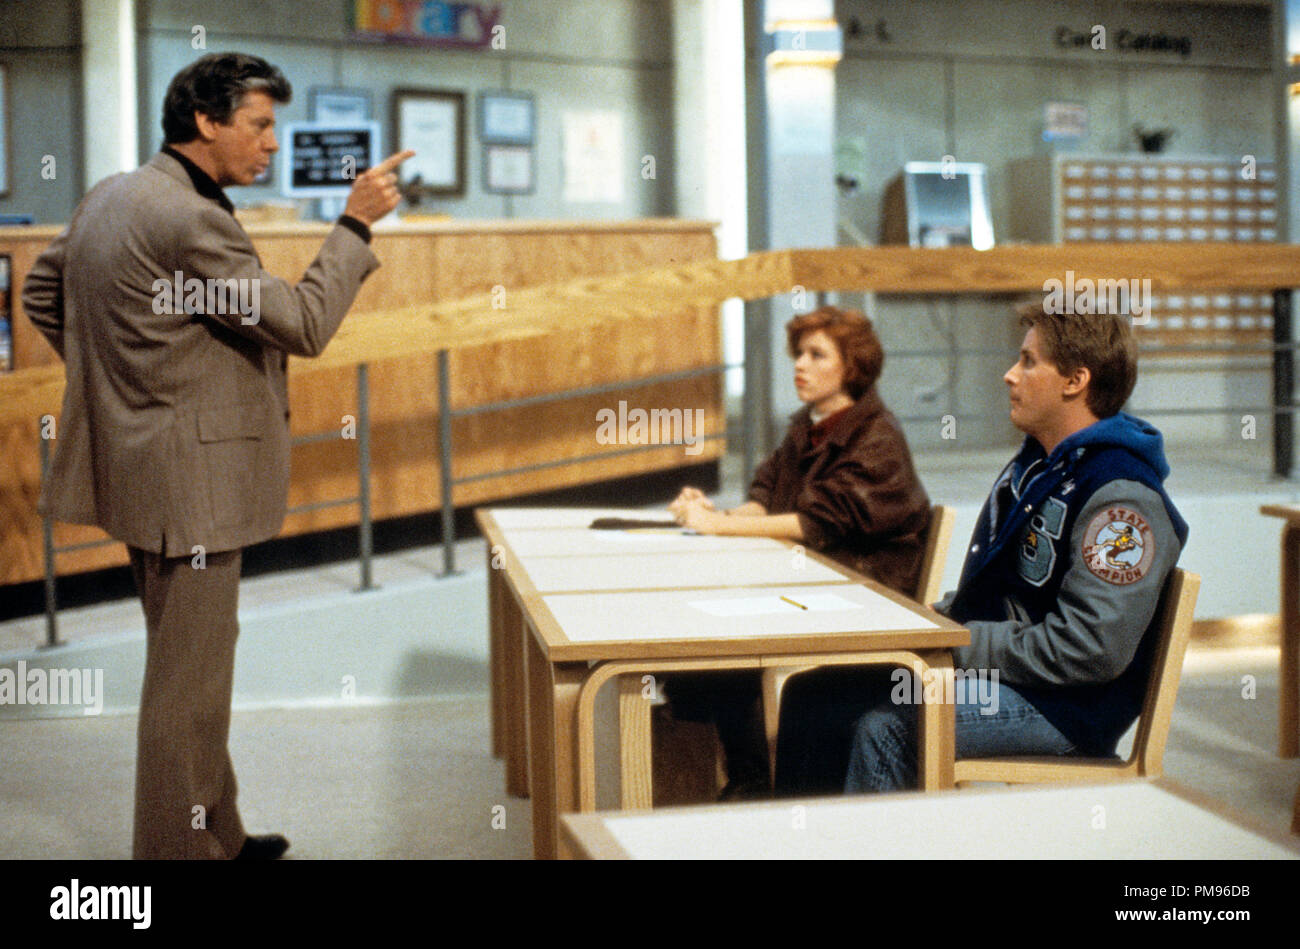 Studio Publicity Still from 'The Breakfast Club' Paul Gleason, Molly Ringwald, Emilio Estevez © 1985 Universal  All Rights Reserved   File Reference # 31703085THA  For Editorial Use Only Stock Photo